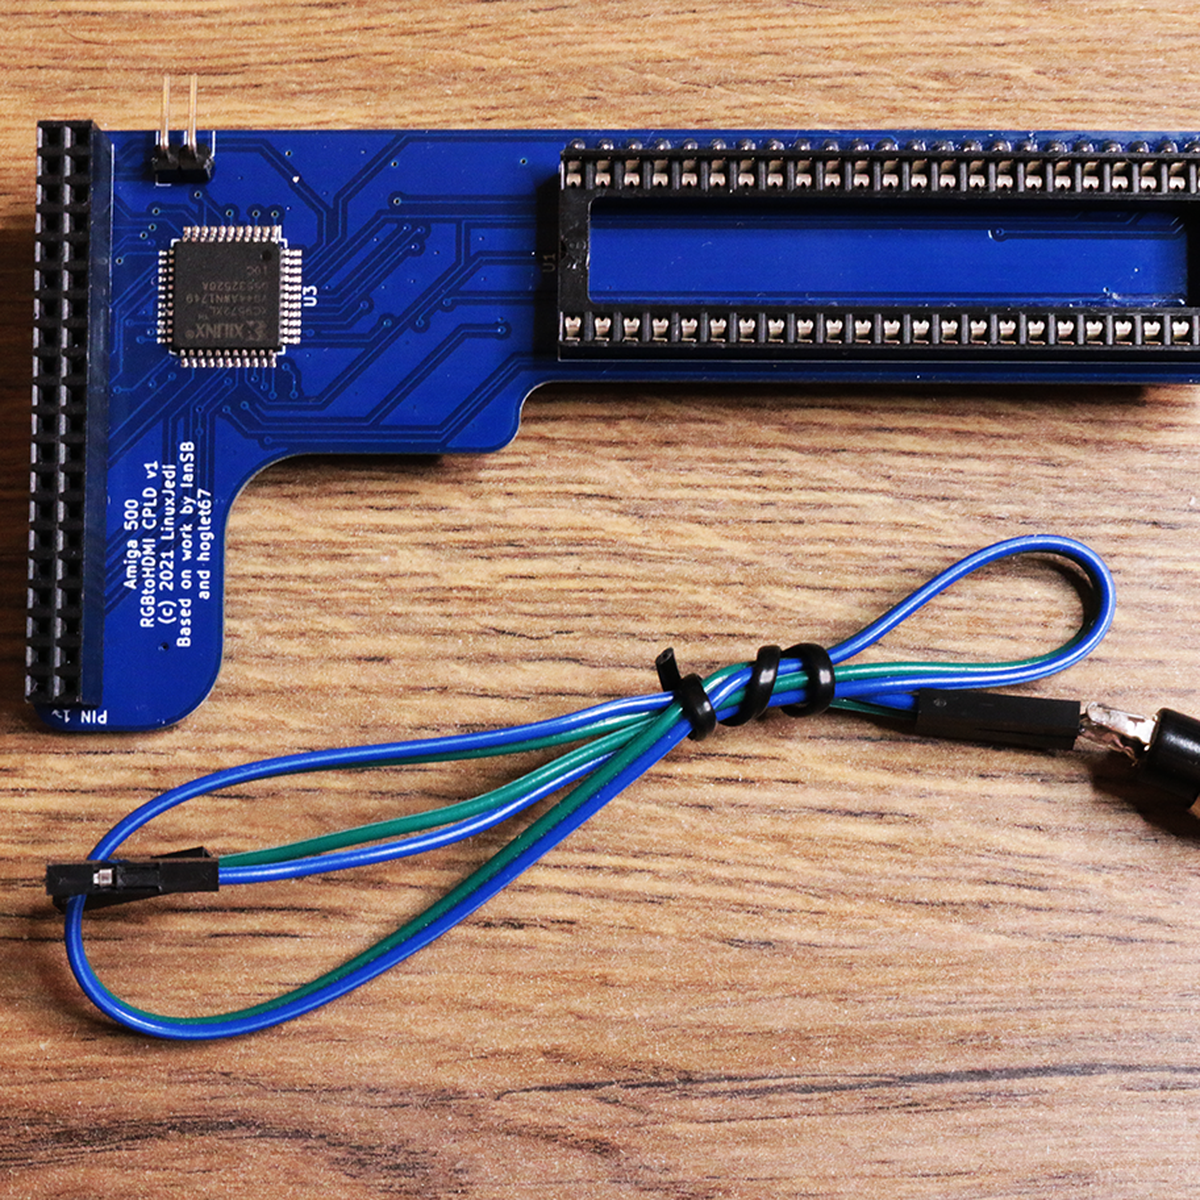 HDMI CPLD 500 for Raspberry Pi A500 from RetroFletch on Tindie